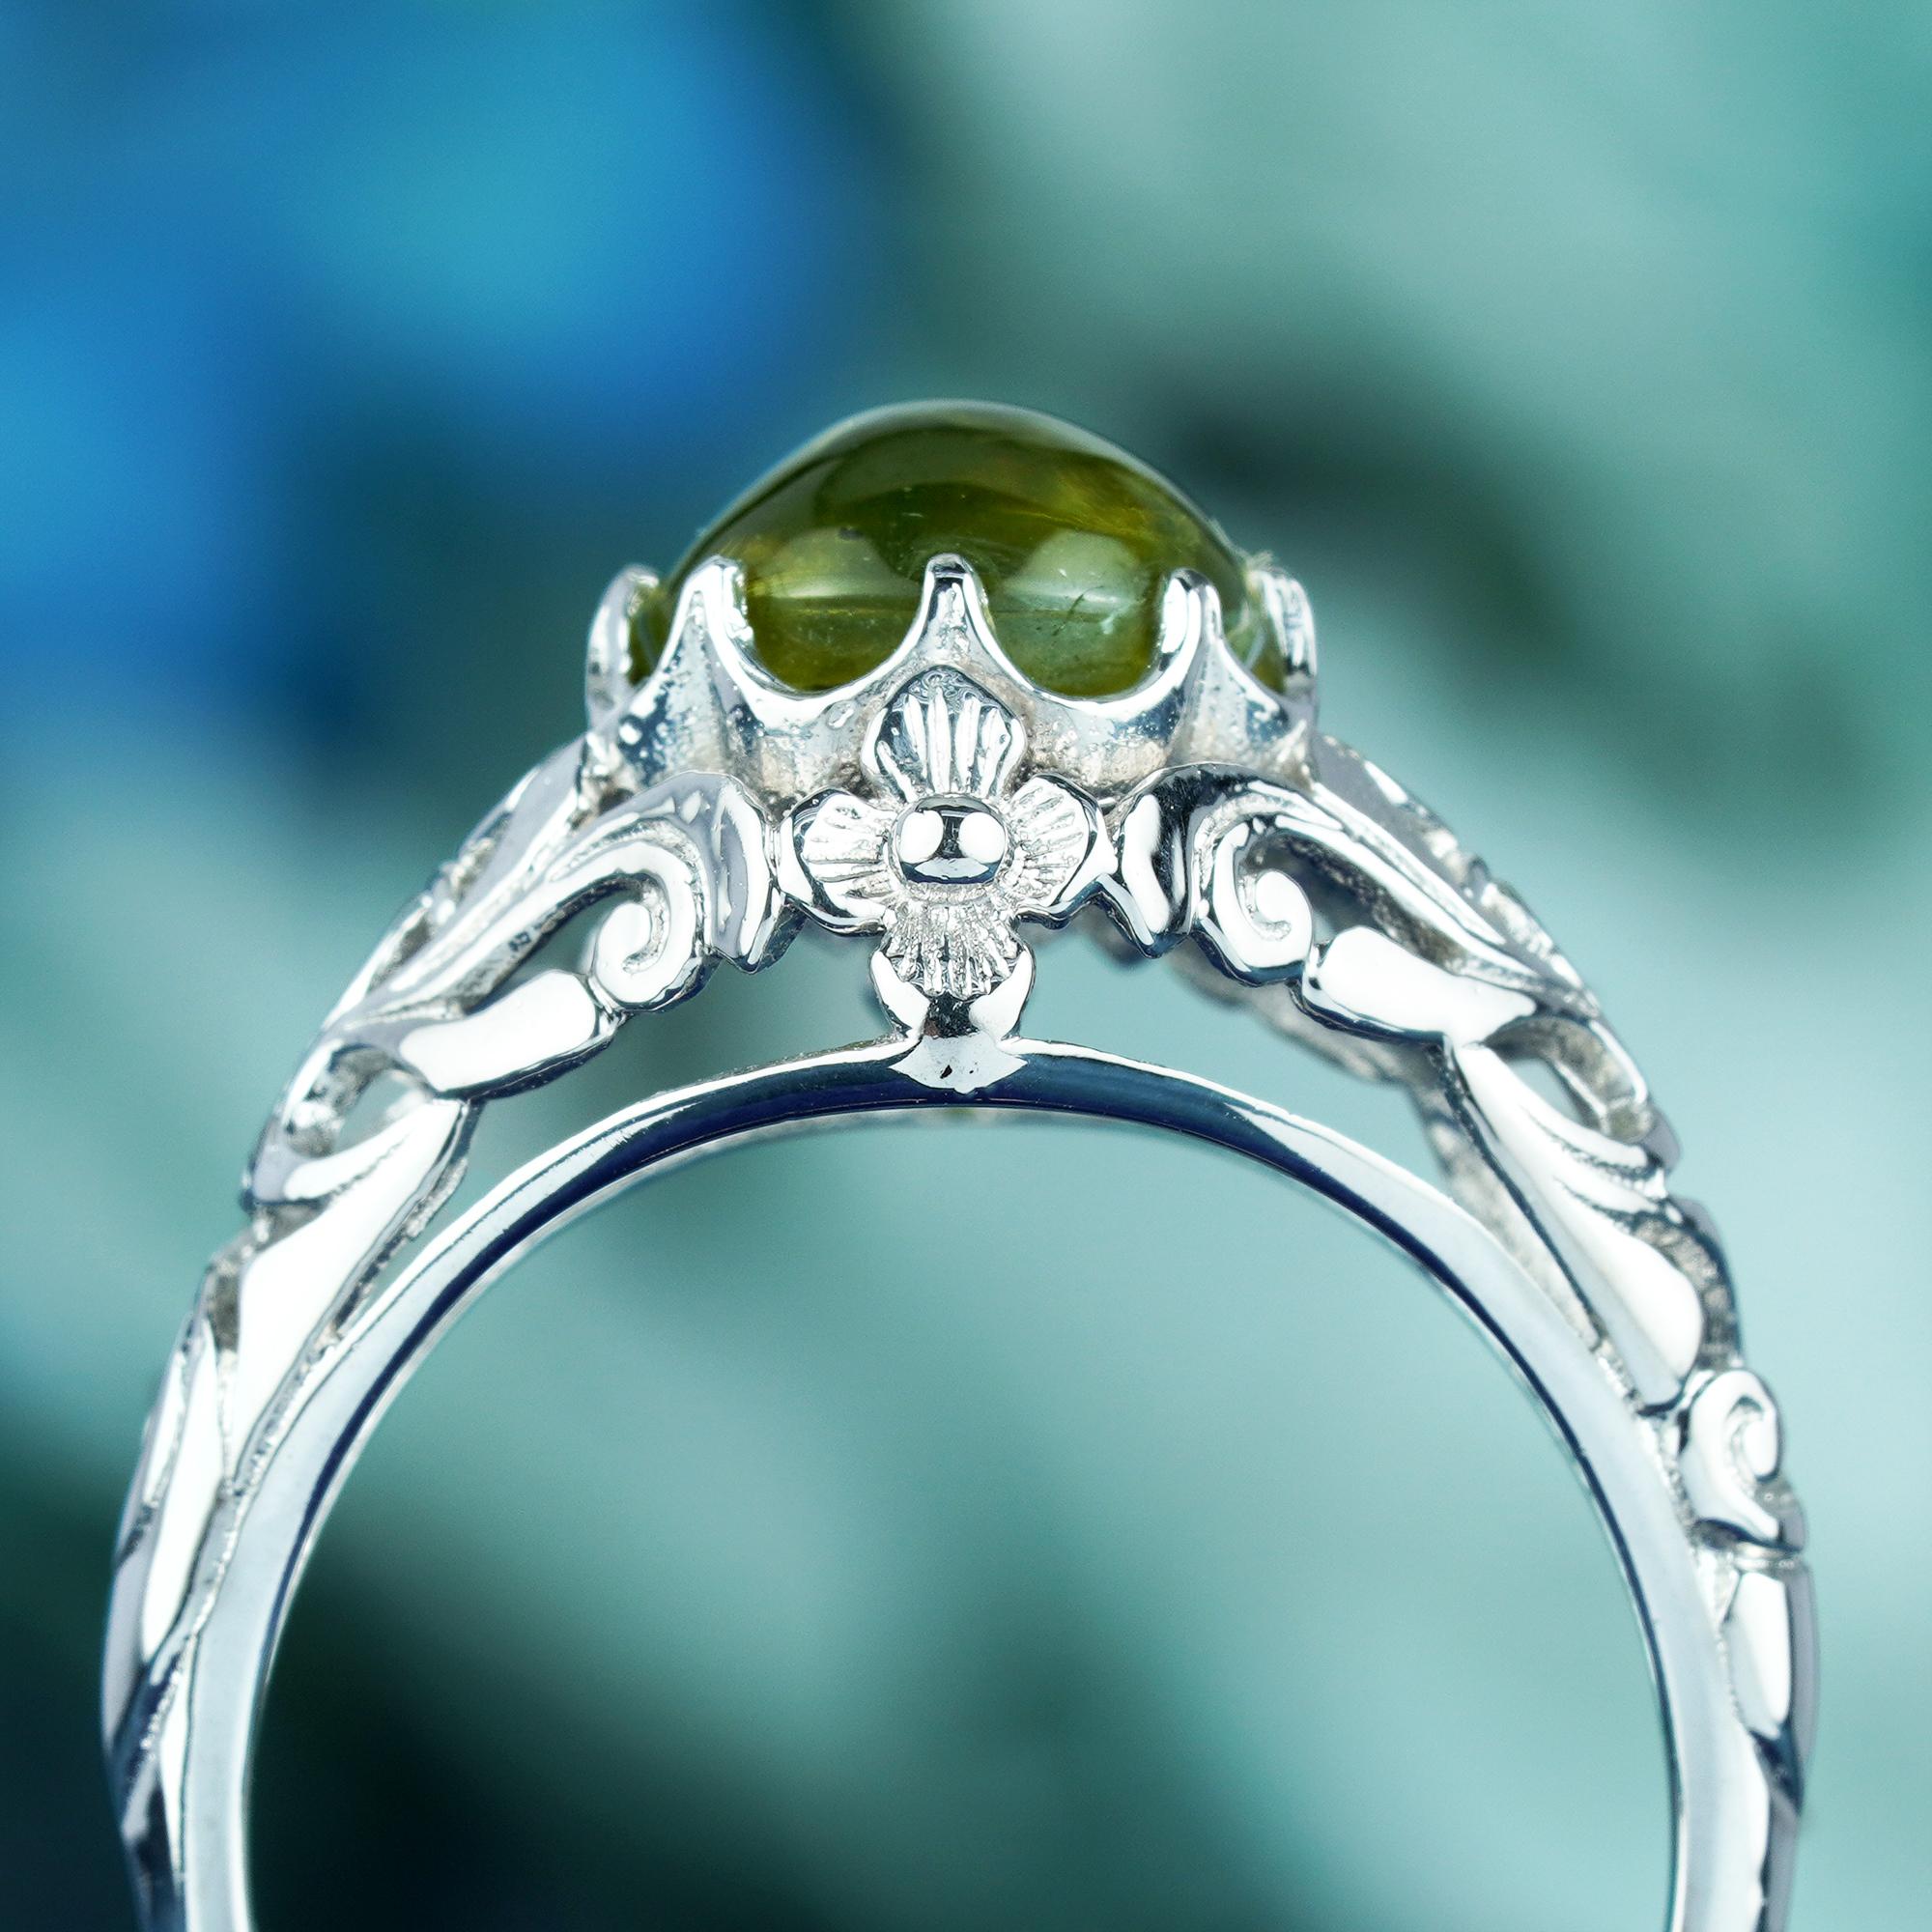 For Sale:  Natural Cabochon Peridot Vintage Style Filigree Ring in Solid 9K White Gold 5